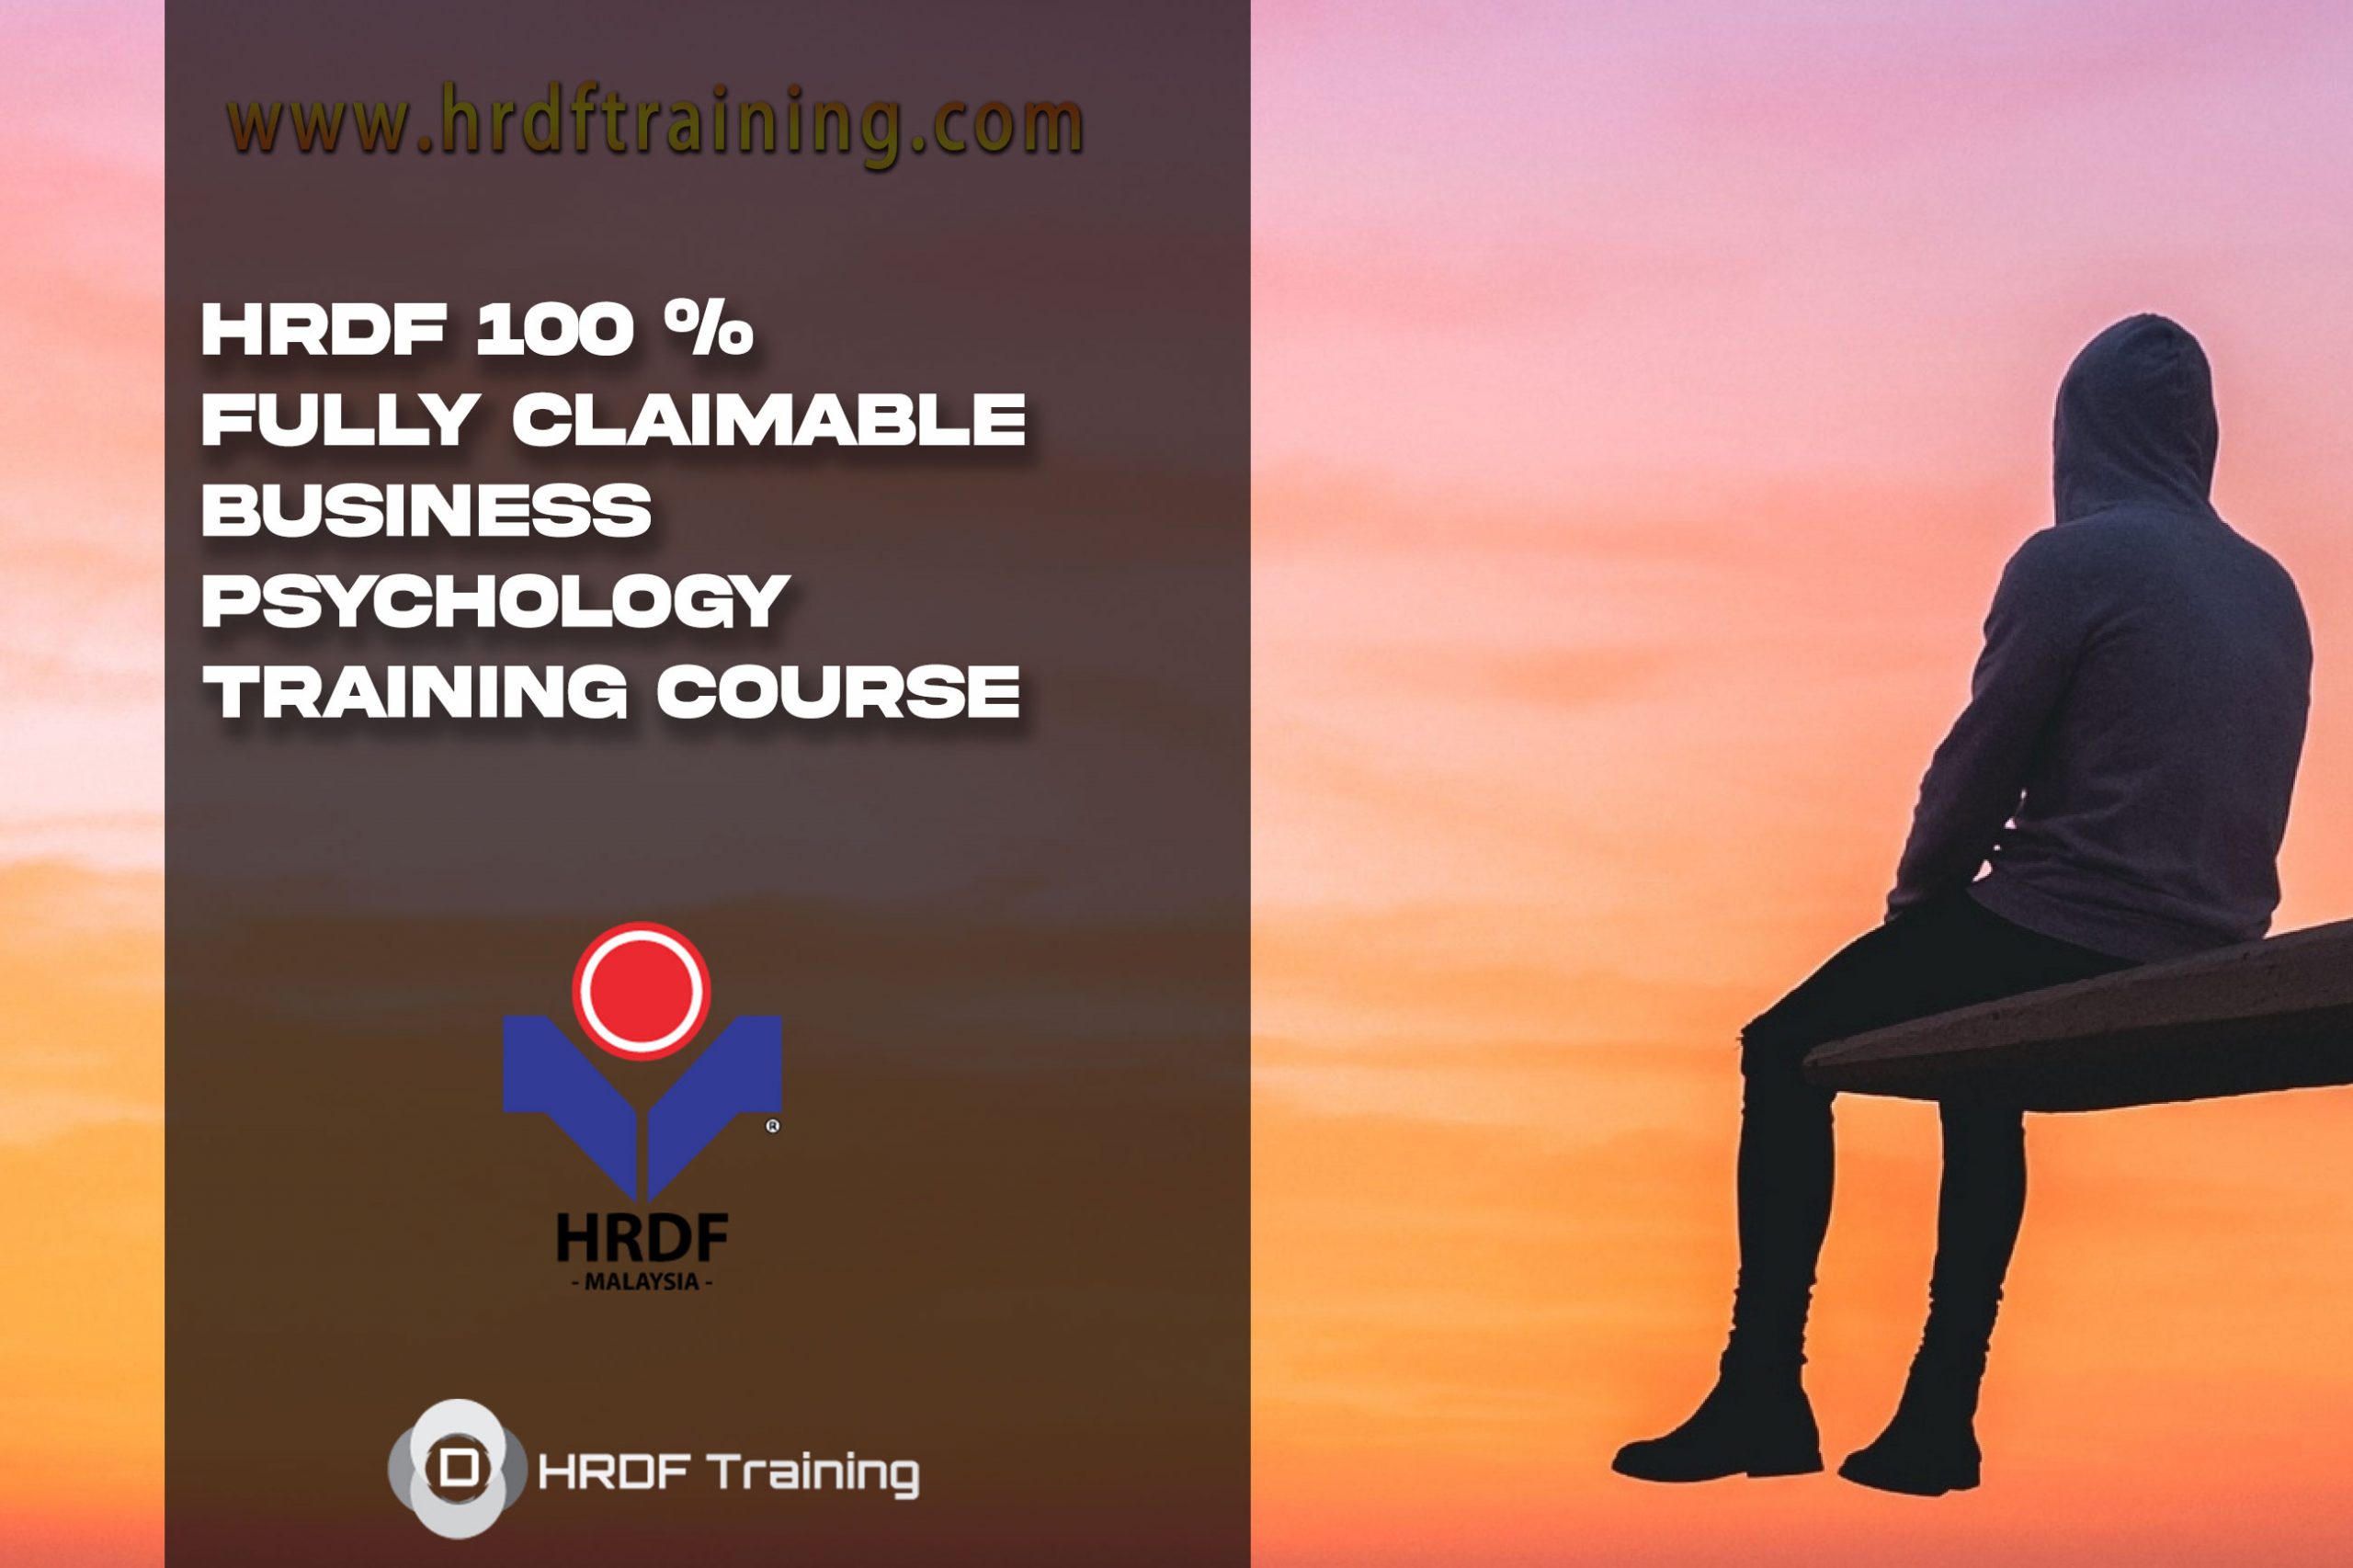 HRDF 100 % Fully Claimable Business Psychology Training Course